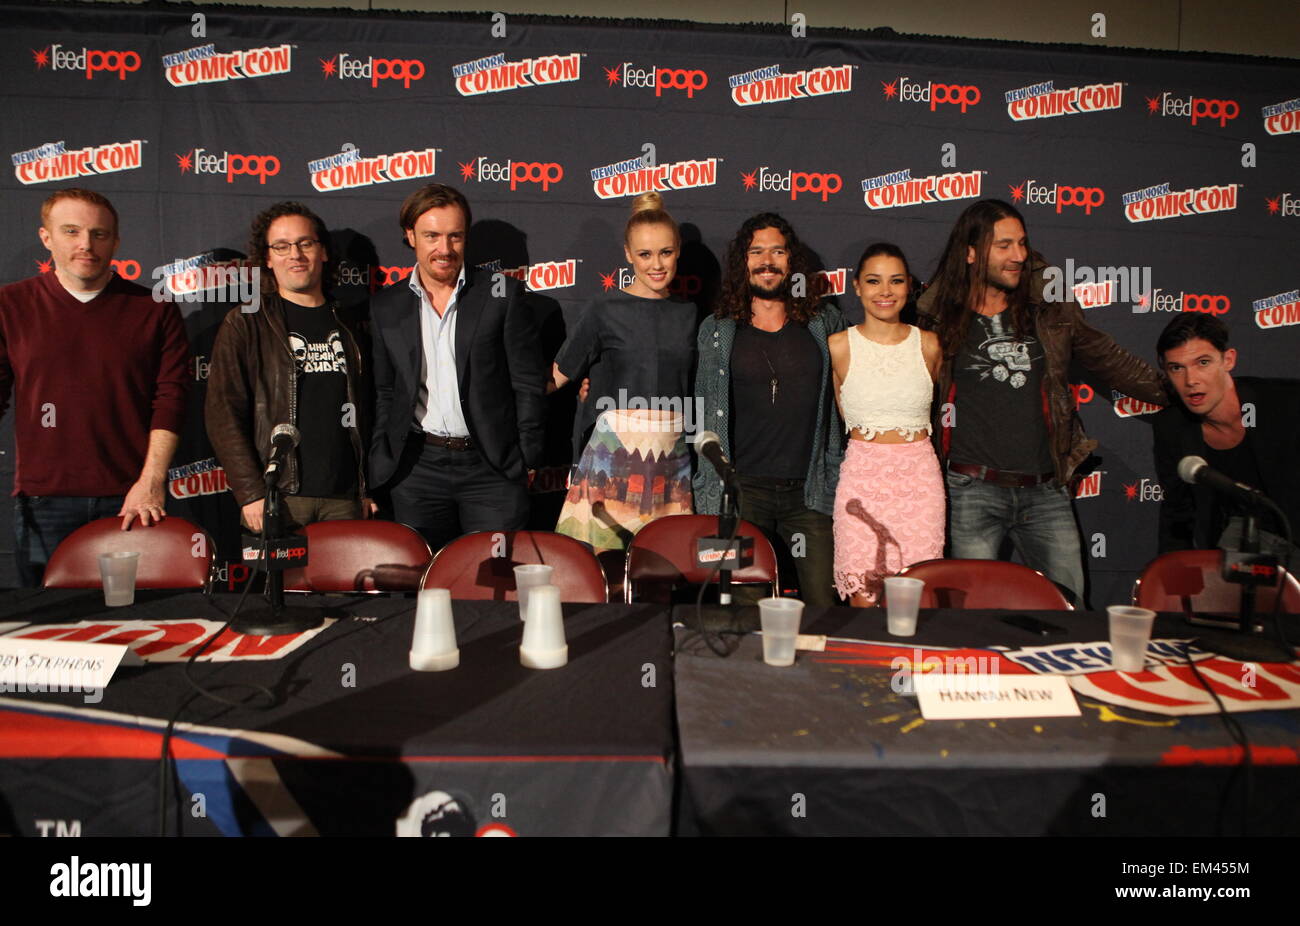 New York Comic Con 2014 at the Javits Center  Featuring: Black Sails Casts From L to R,Jon Steinberg,Robert Levine,Toby Stephens,Hannah New,Luke Arnold,Jessica Parker Kennedy,Zach Mcgowan,Toby Schmitz Where: New York, United States When: 11 Oct 2014 Stock Photo